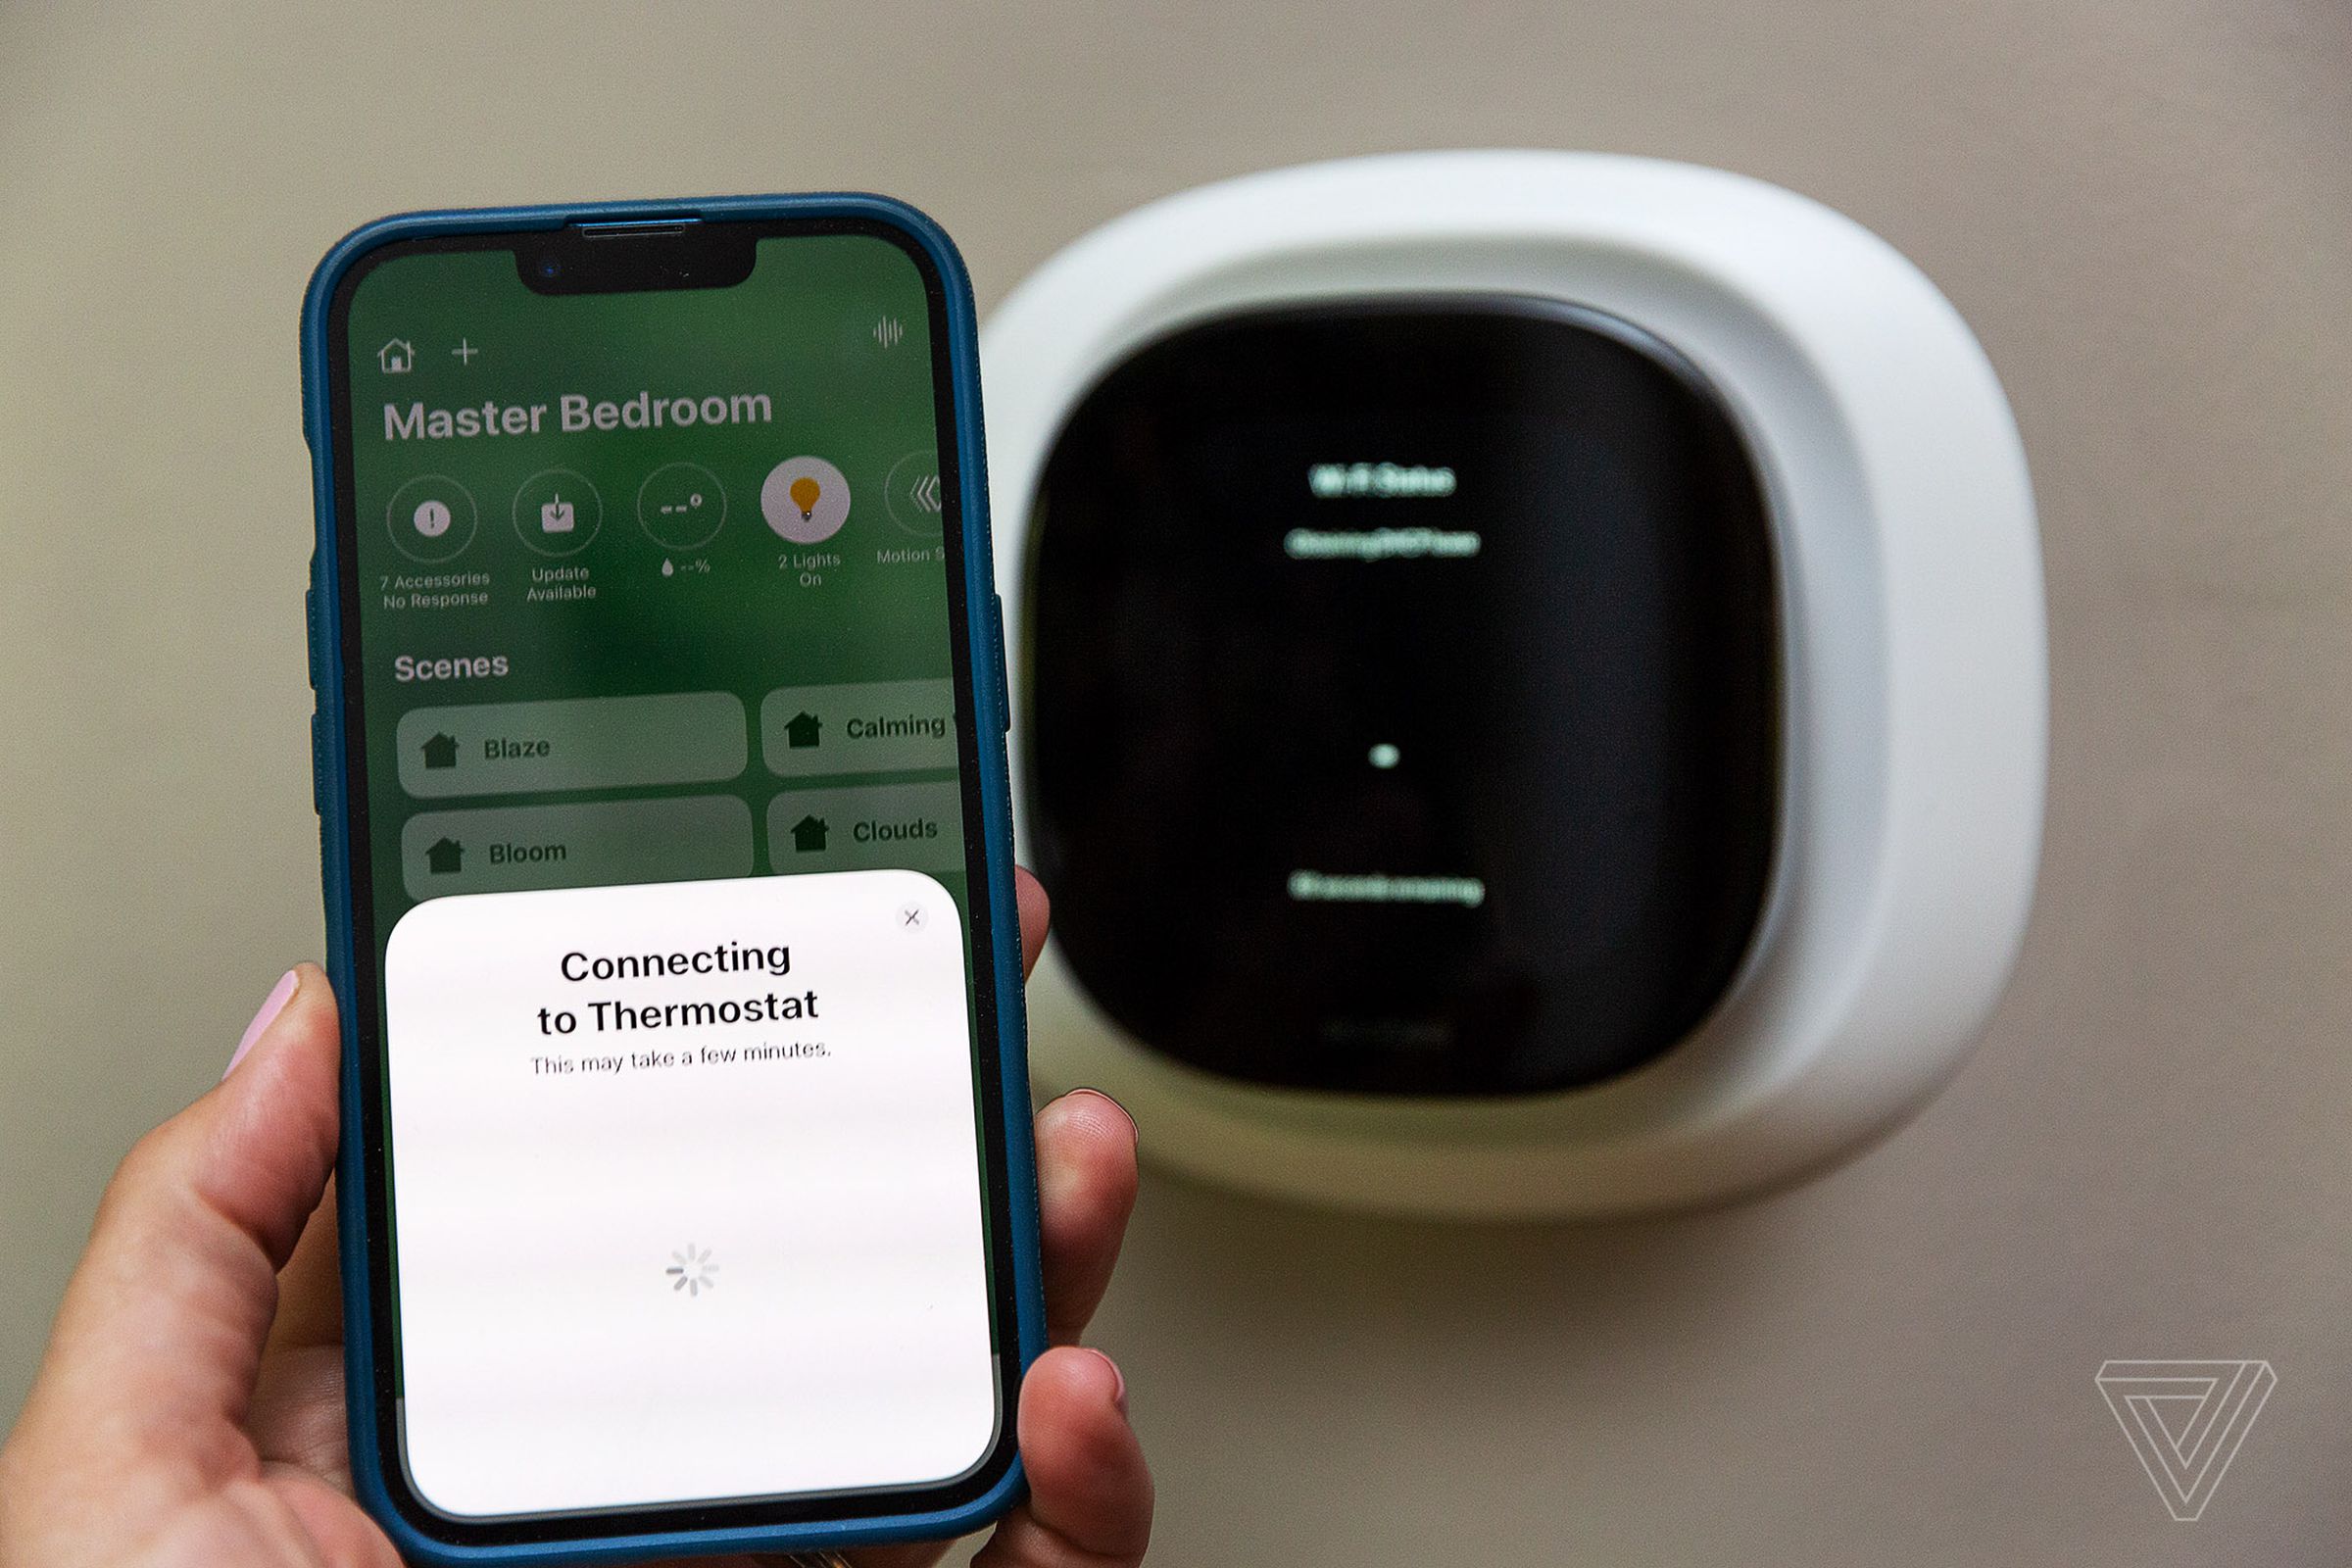 Ecobee works with HomeKit and its Smart Sensors and security system all show up in the Home app.